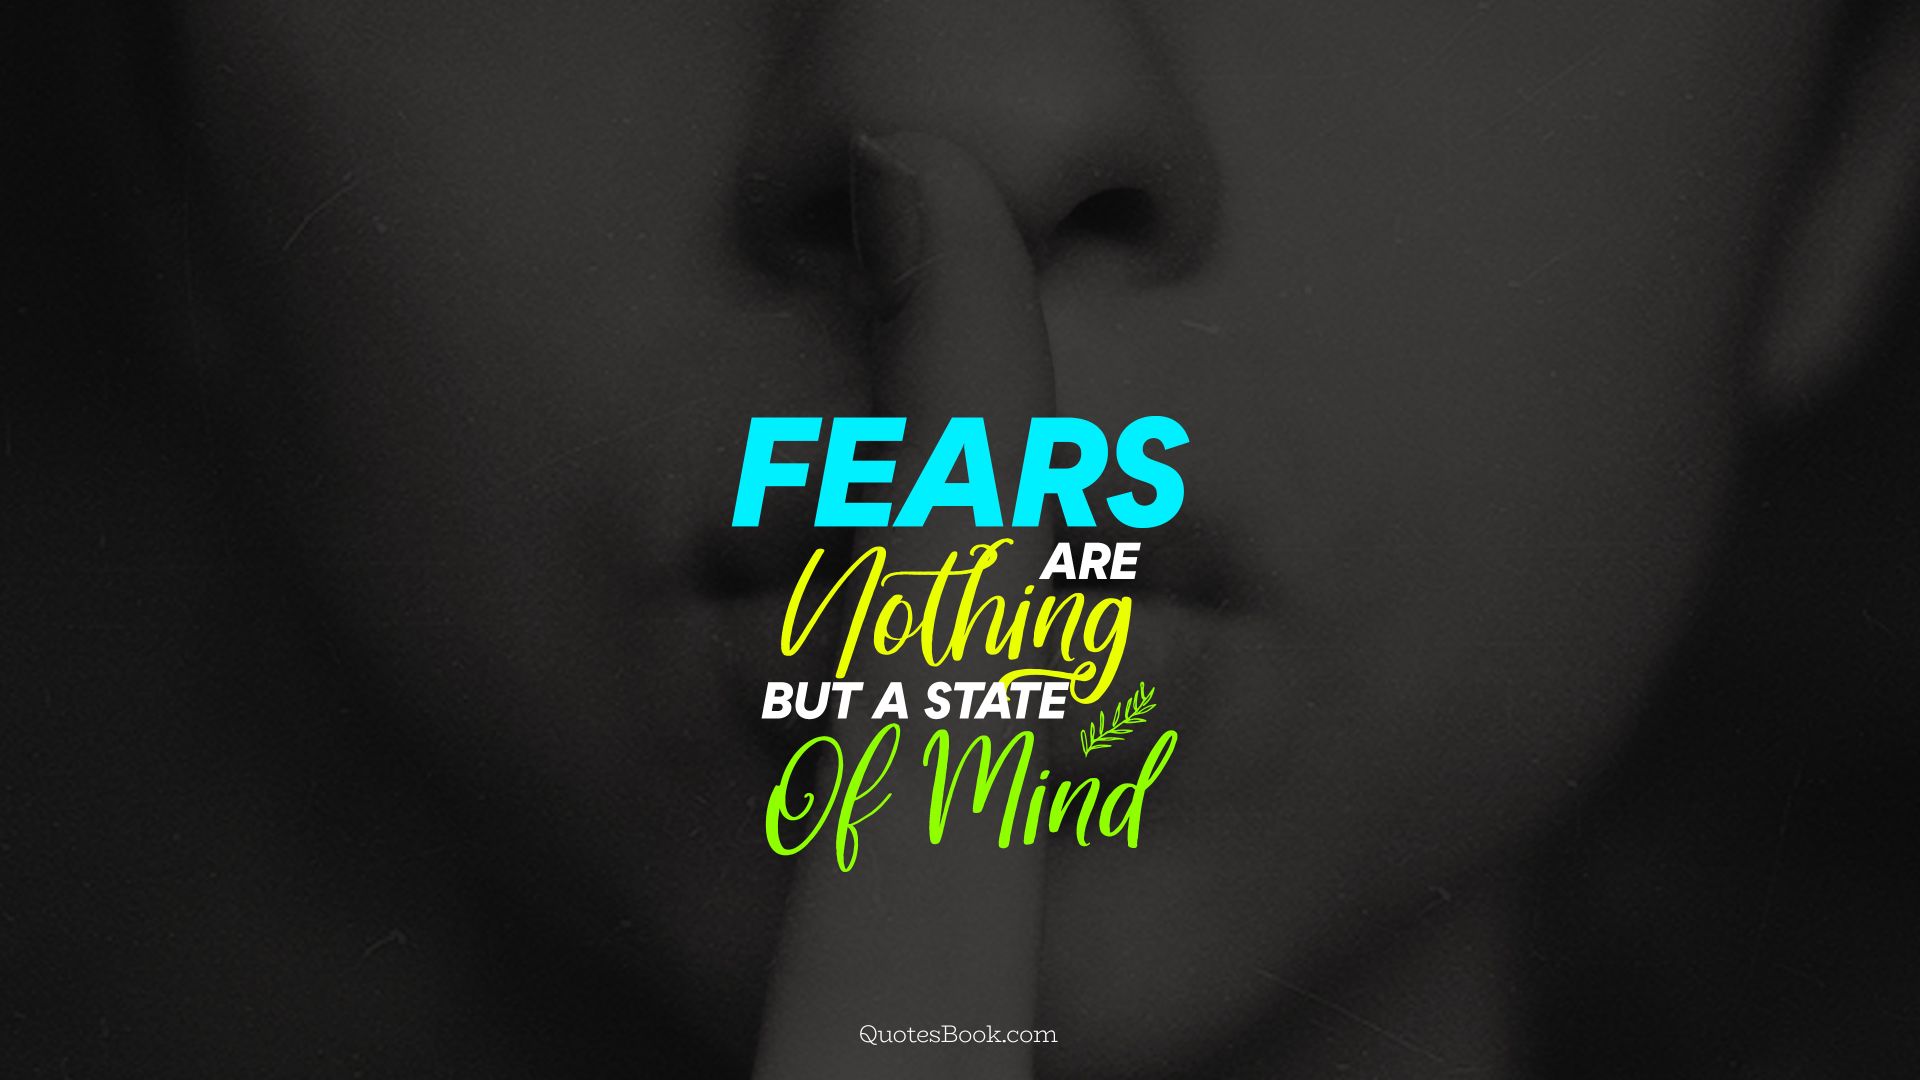 Fears are nothing but a state of mind